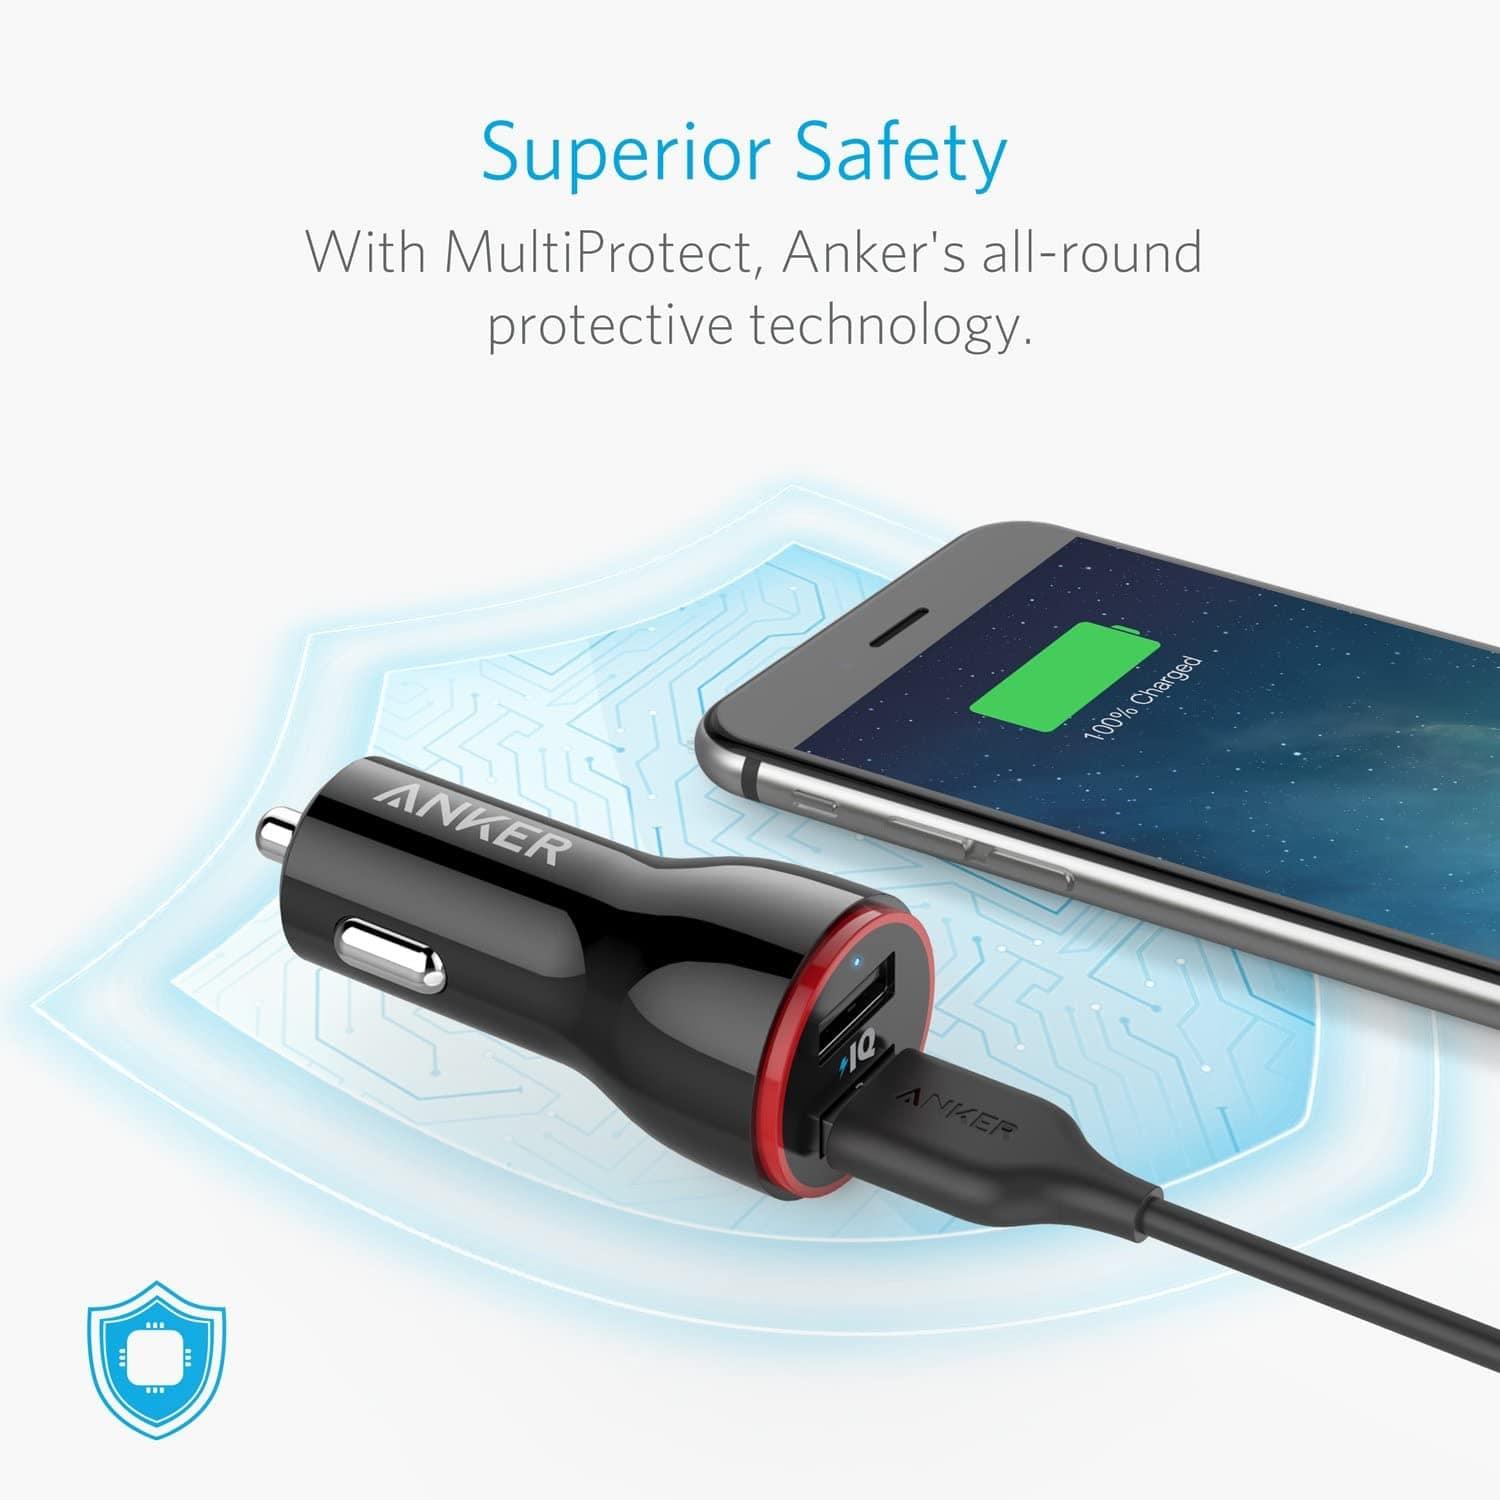 Anker 24W Dual USB Car Charger, PowerDrive 2 for iPhone X / 8/7 / 6s / Plus  and More